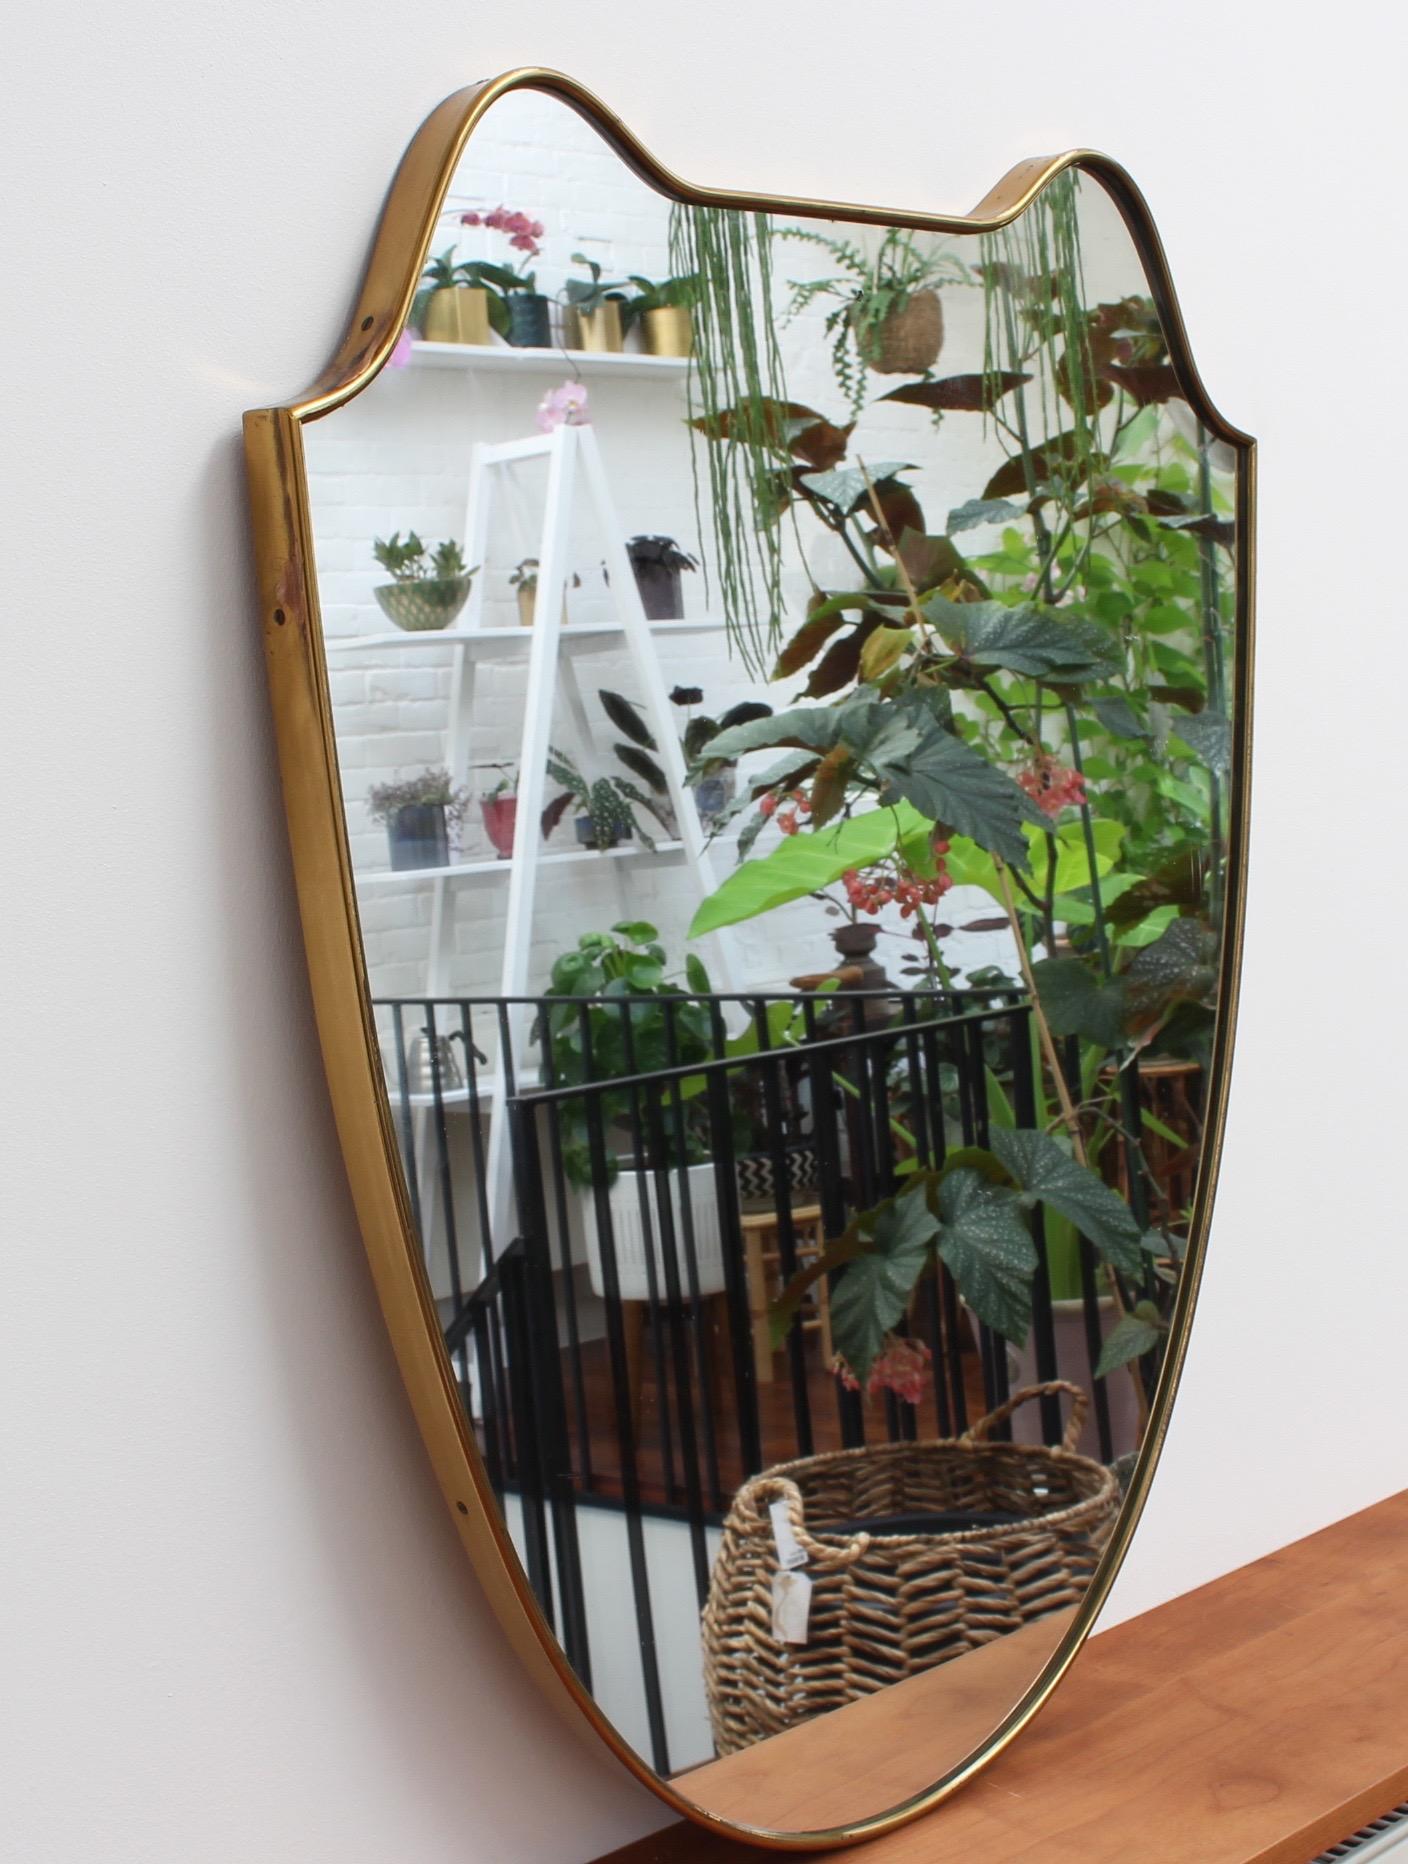 Midcentury Italian wall mirror with brass frame, circa 1950s. This mirror is substantial, solid and at once elegant. It is the movie star of vintage mirrors with its incredible looks, charming personality and characterful beauty marks that others